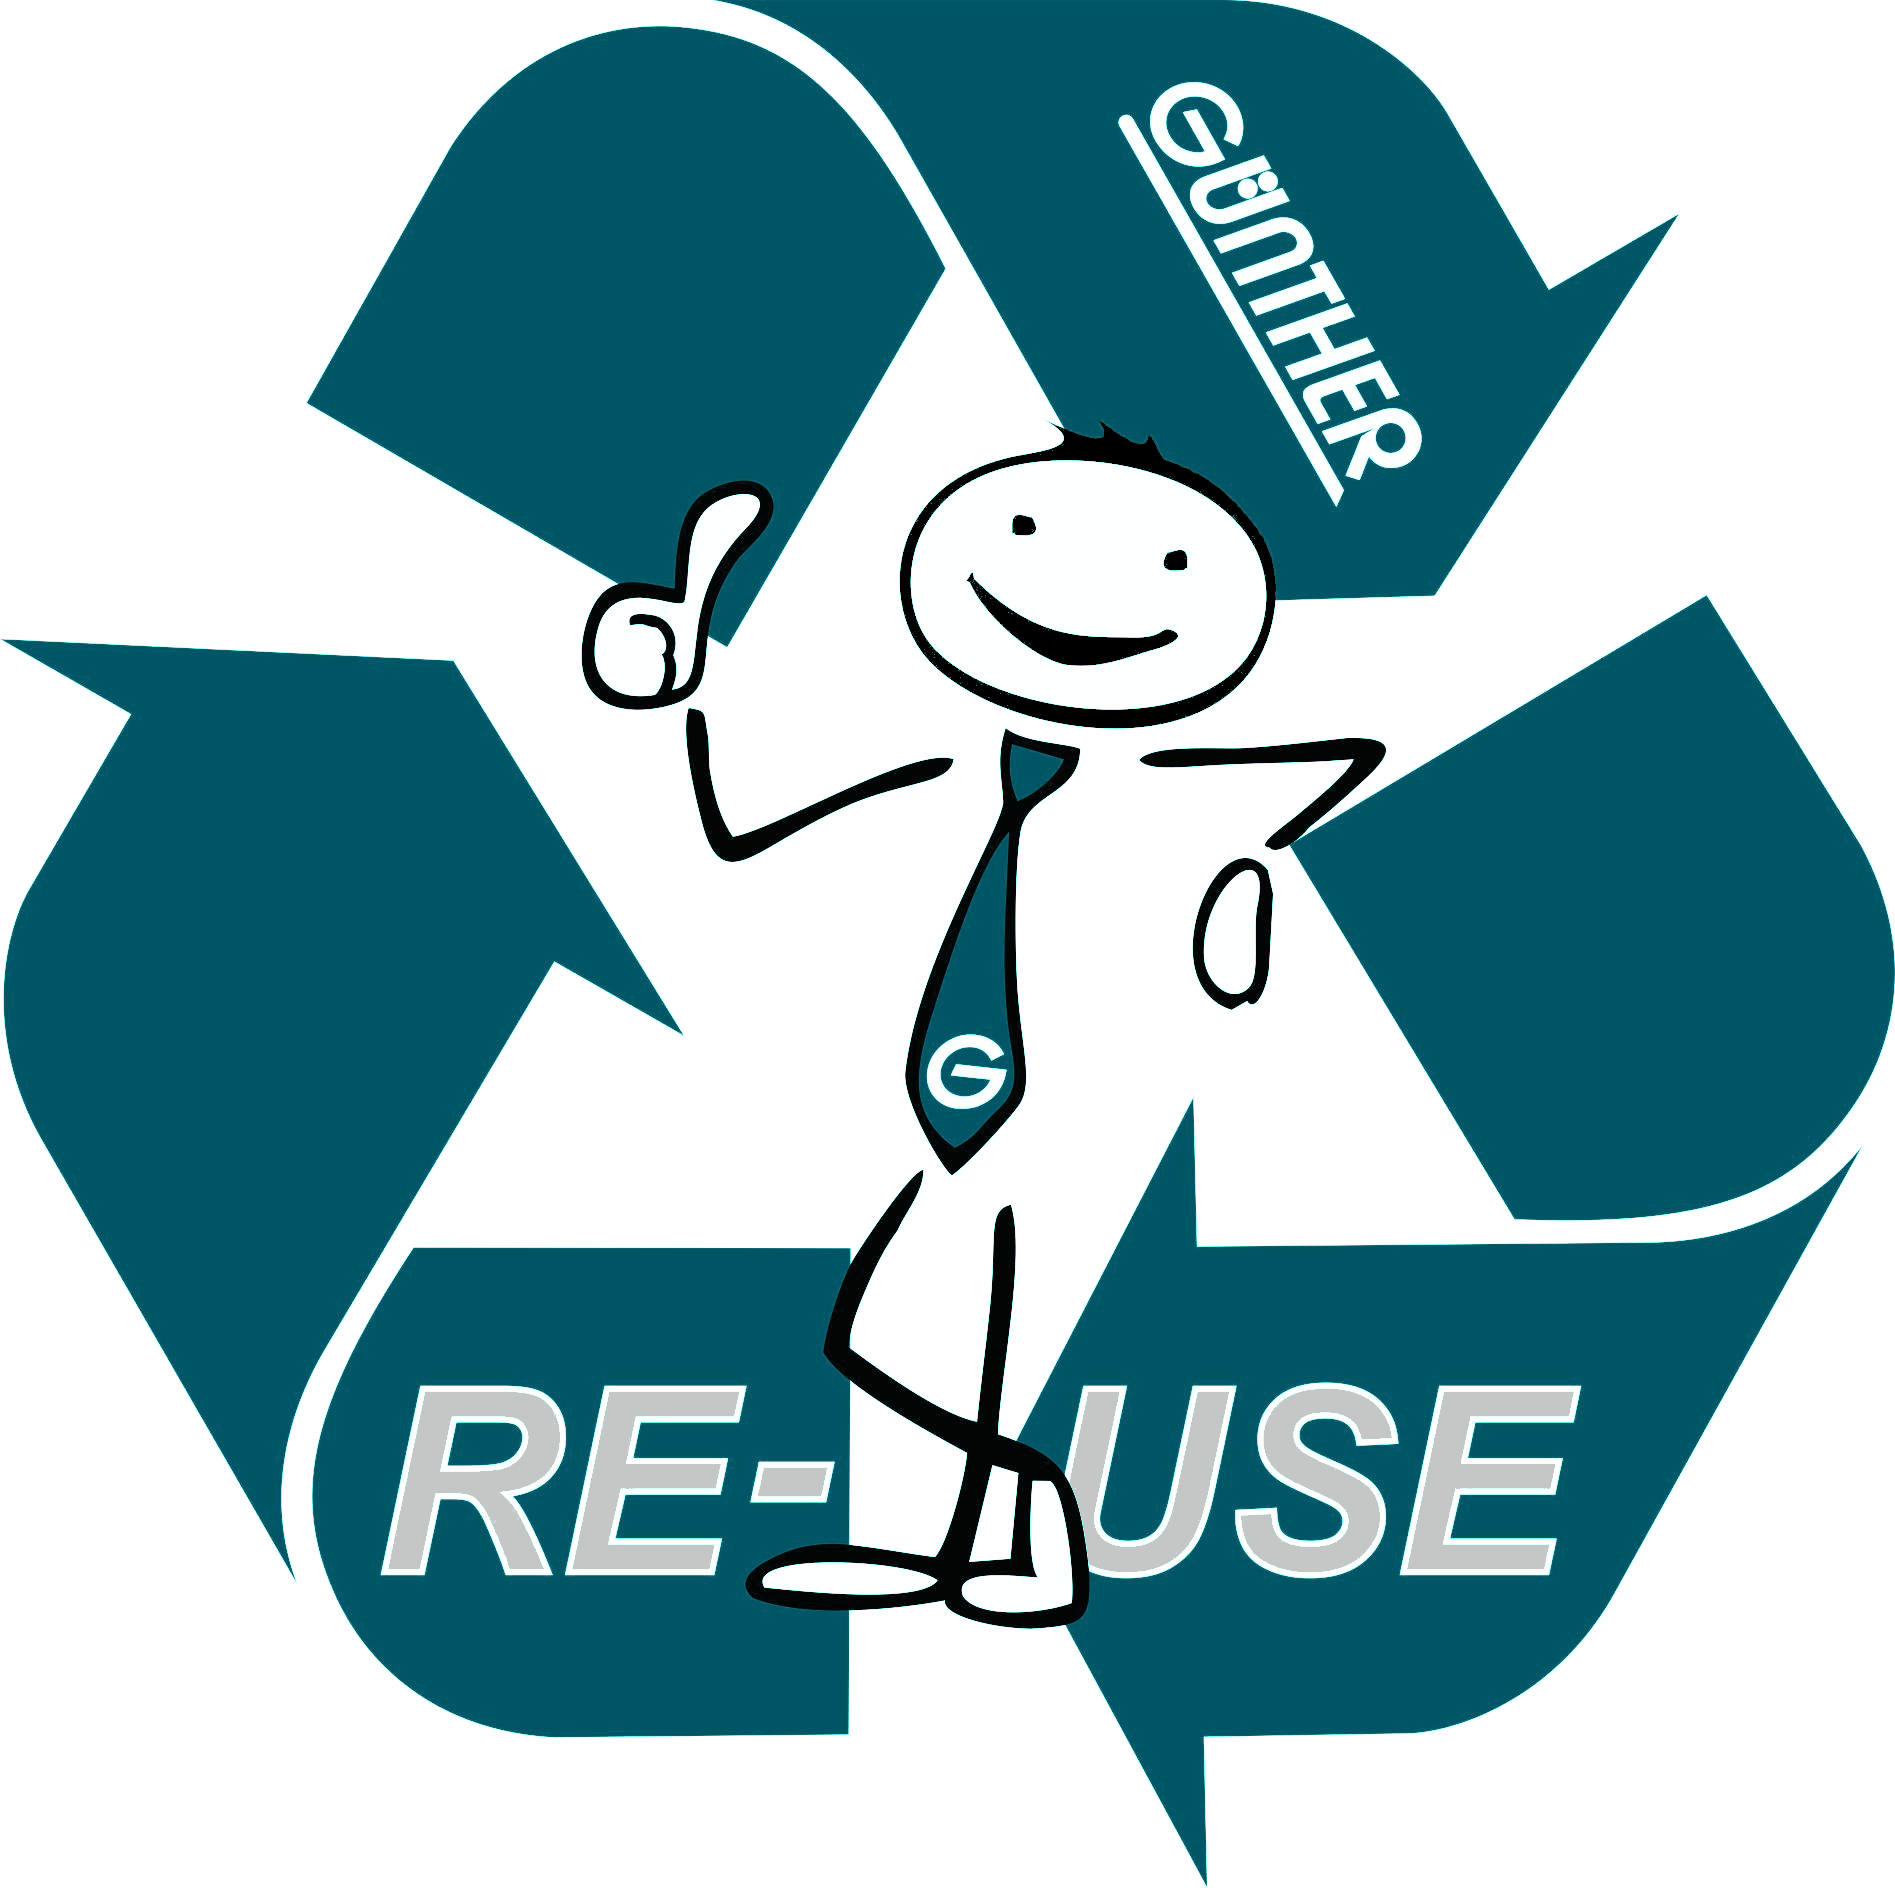 RE-USE